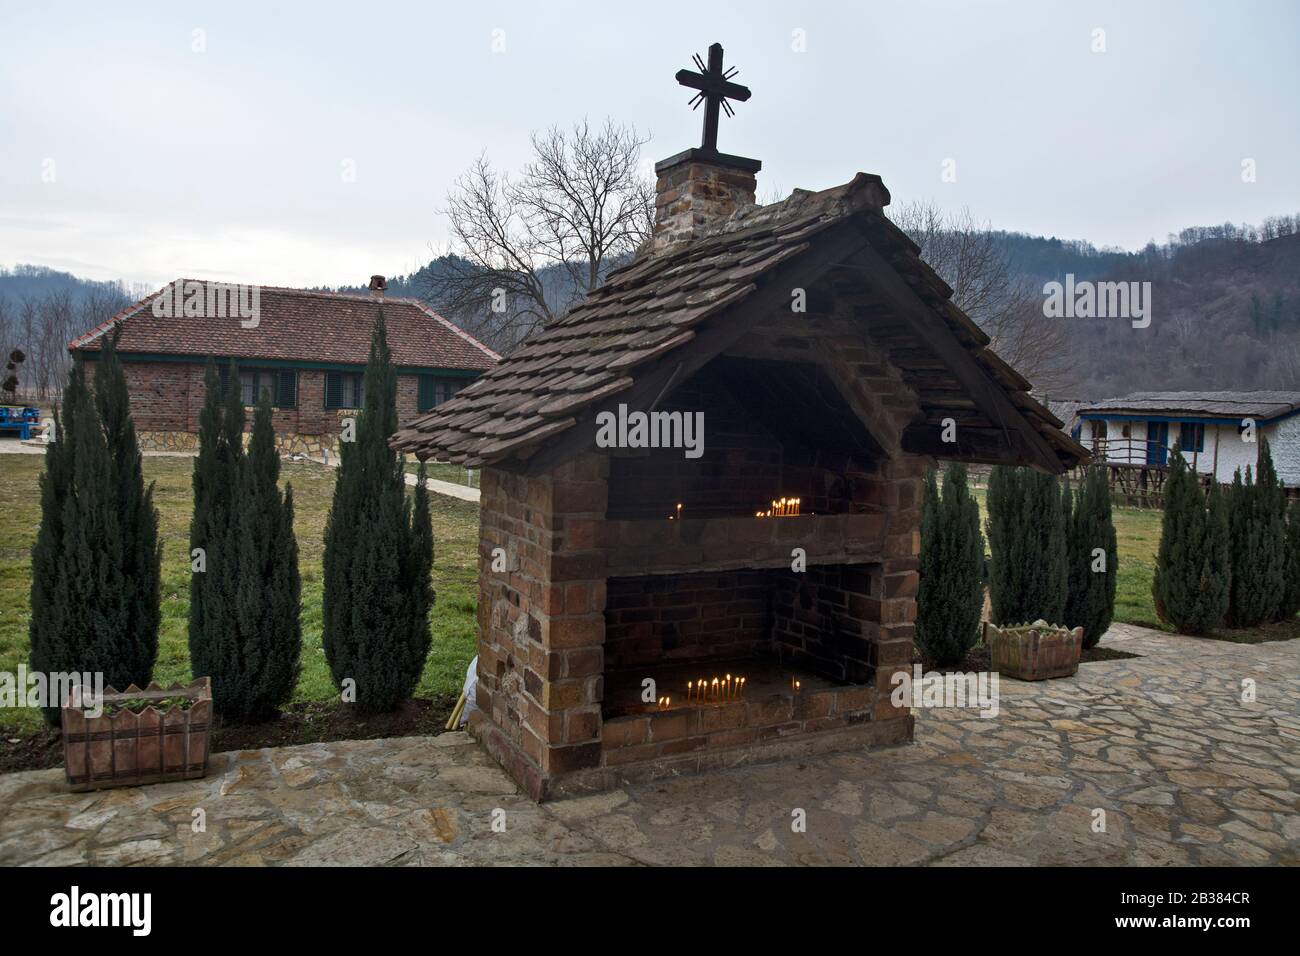 Koviljaca Spa, Sunny River, January 26, 2019. A religious building next to a small church where believers light candles for the living and the dead. Stock Photo